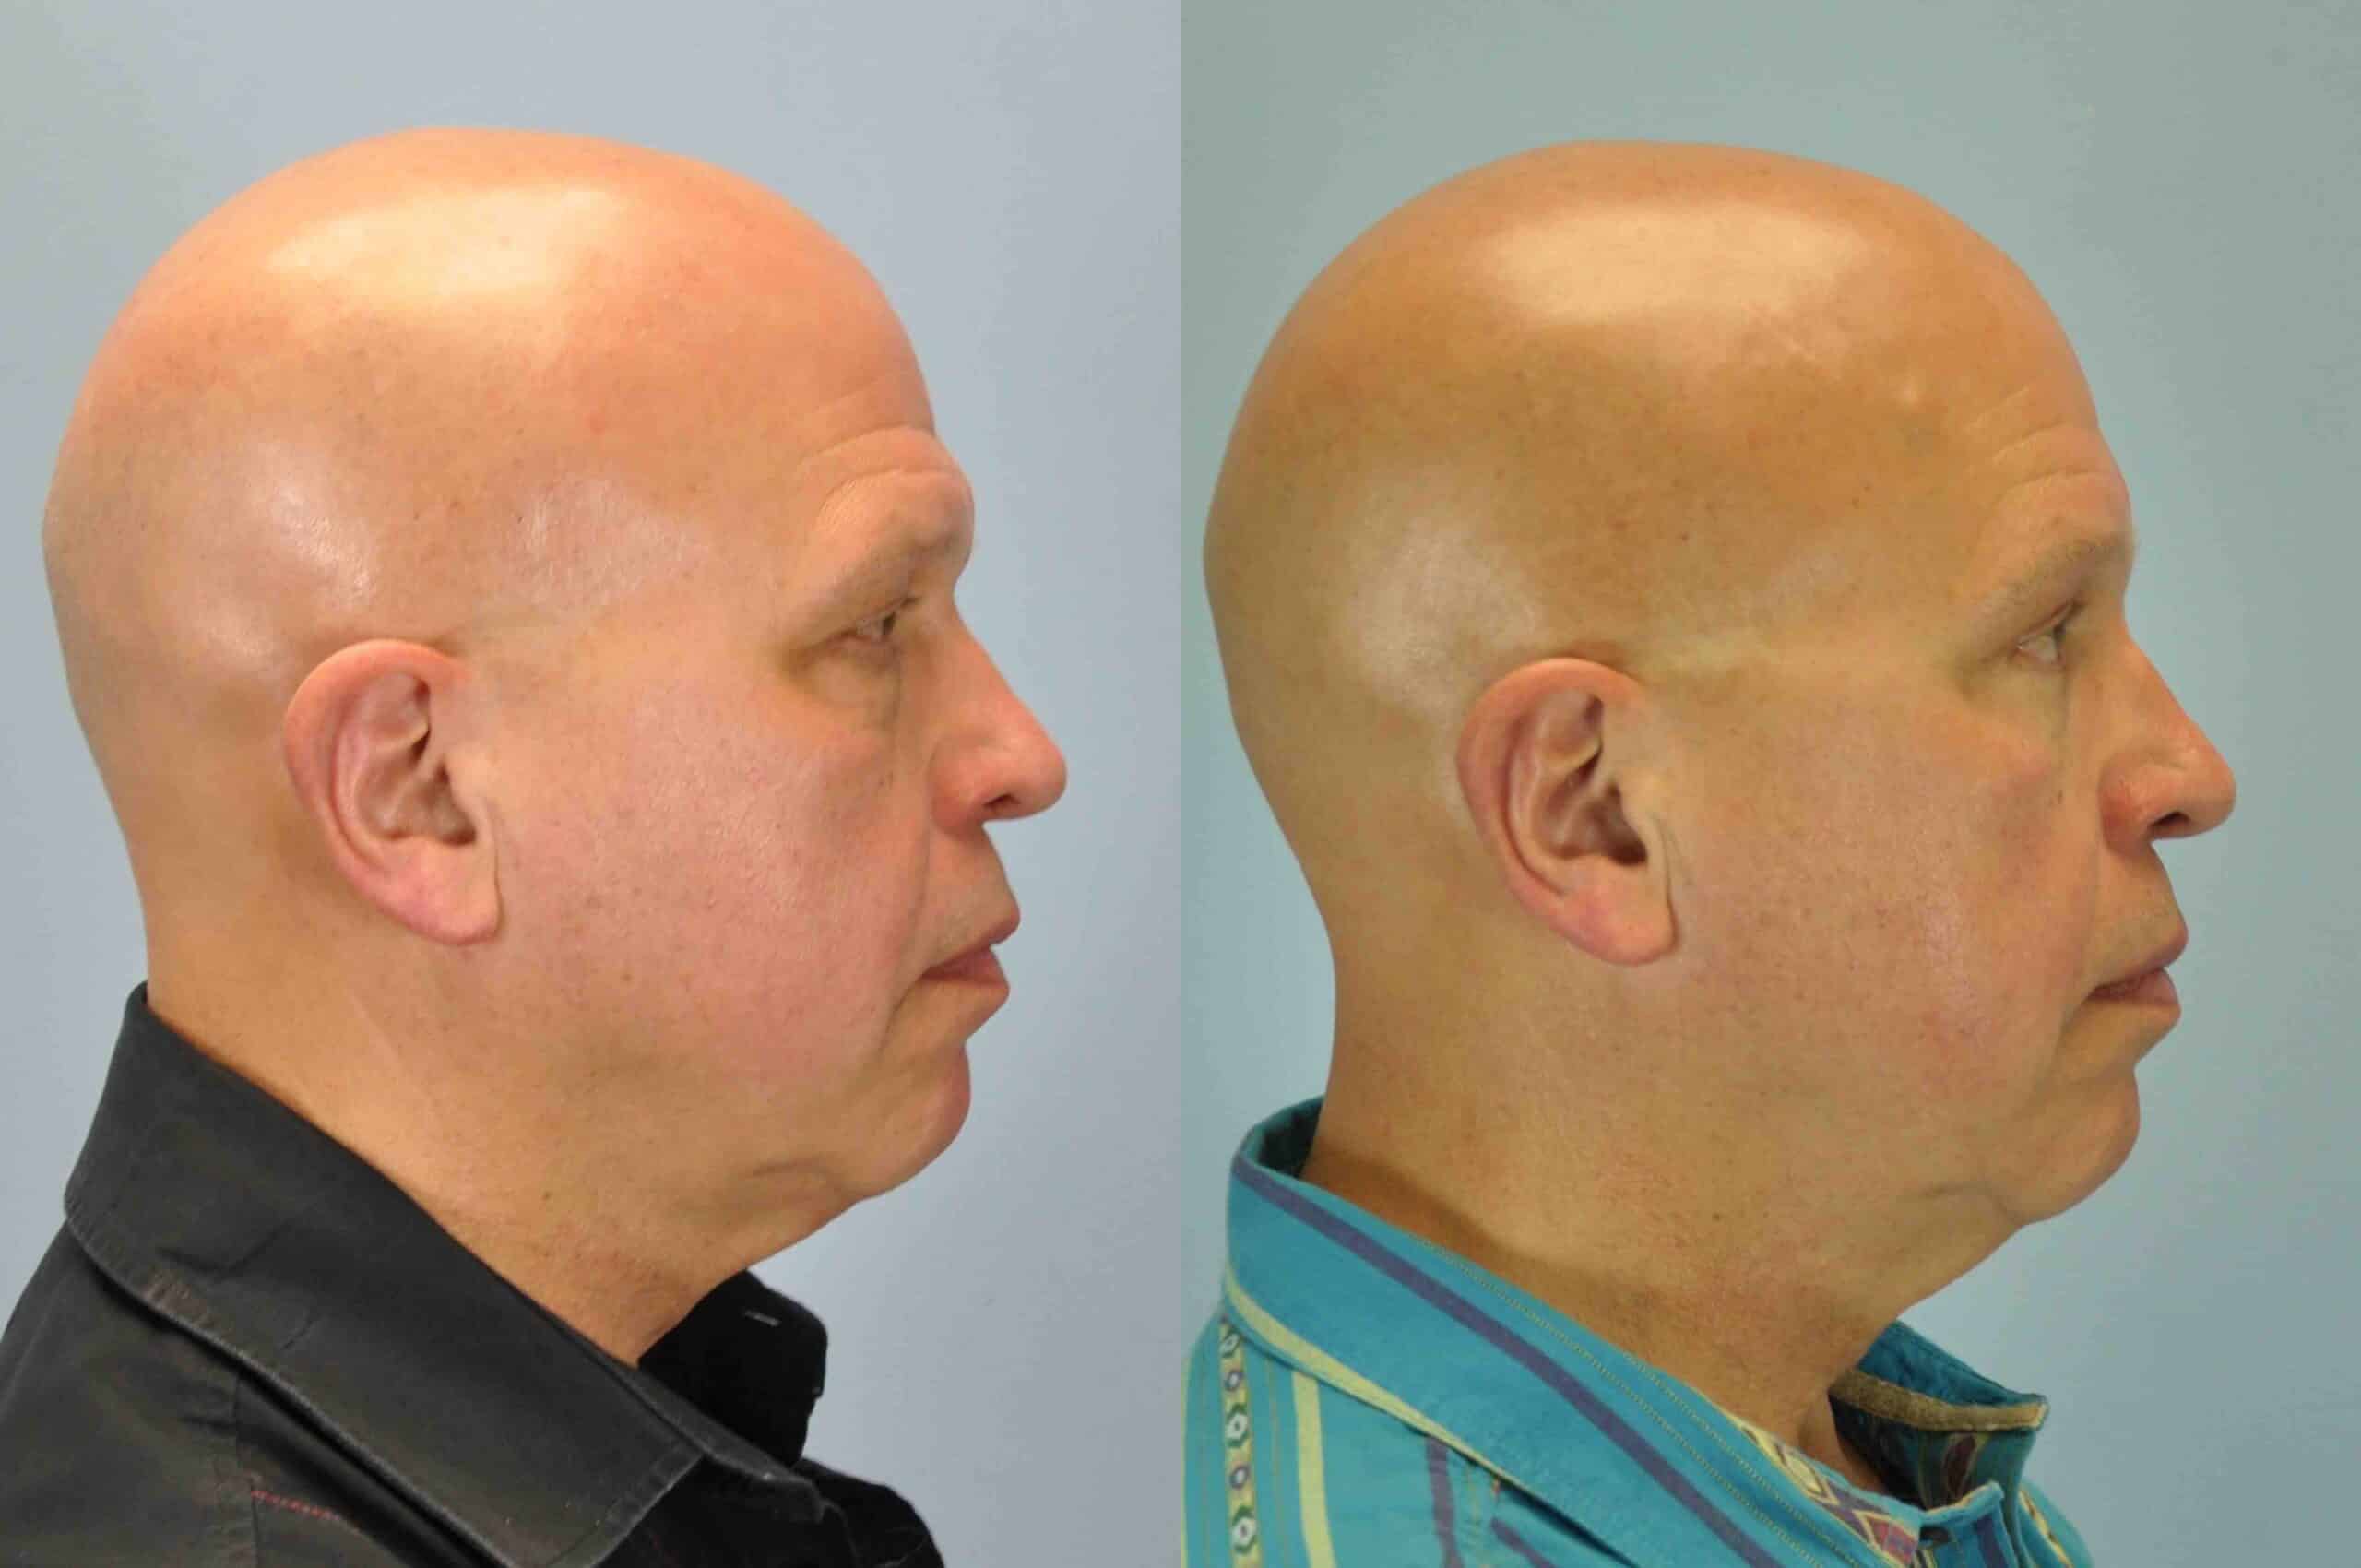 Before and after, patient 6 mo post op from Endo Brow procedure performed by Dr. Paul Vanek